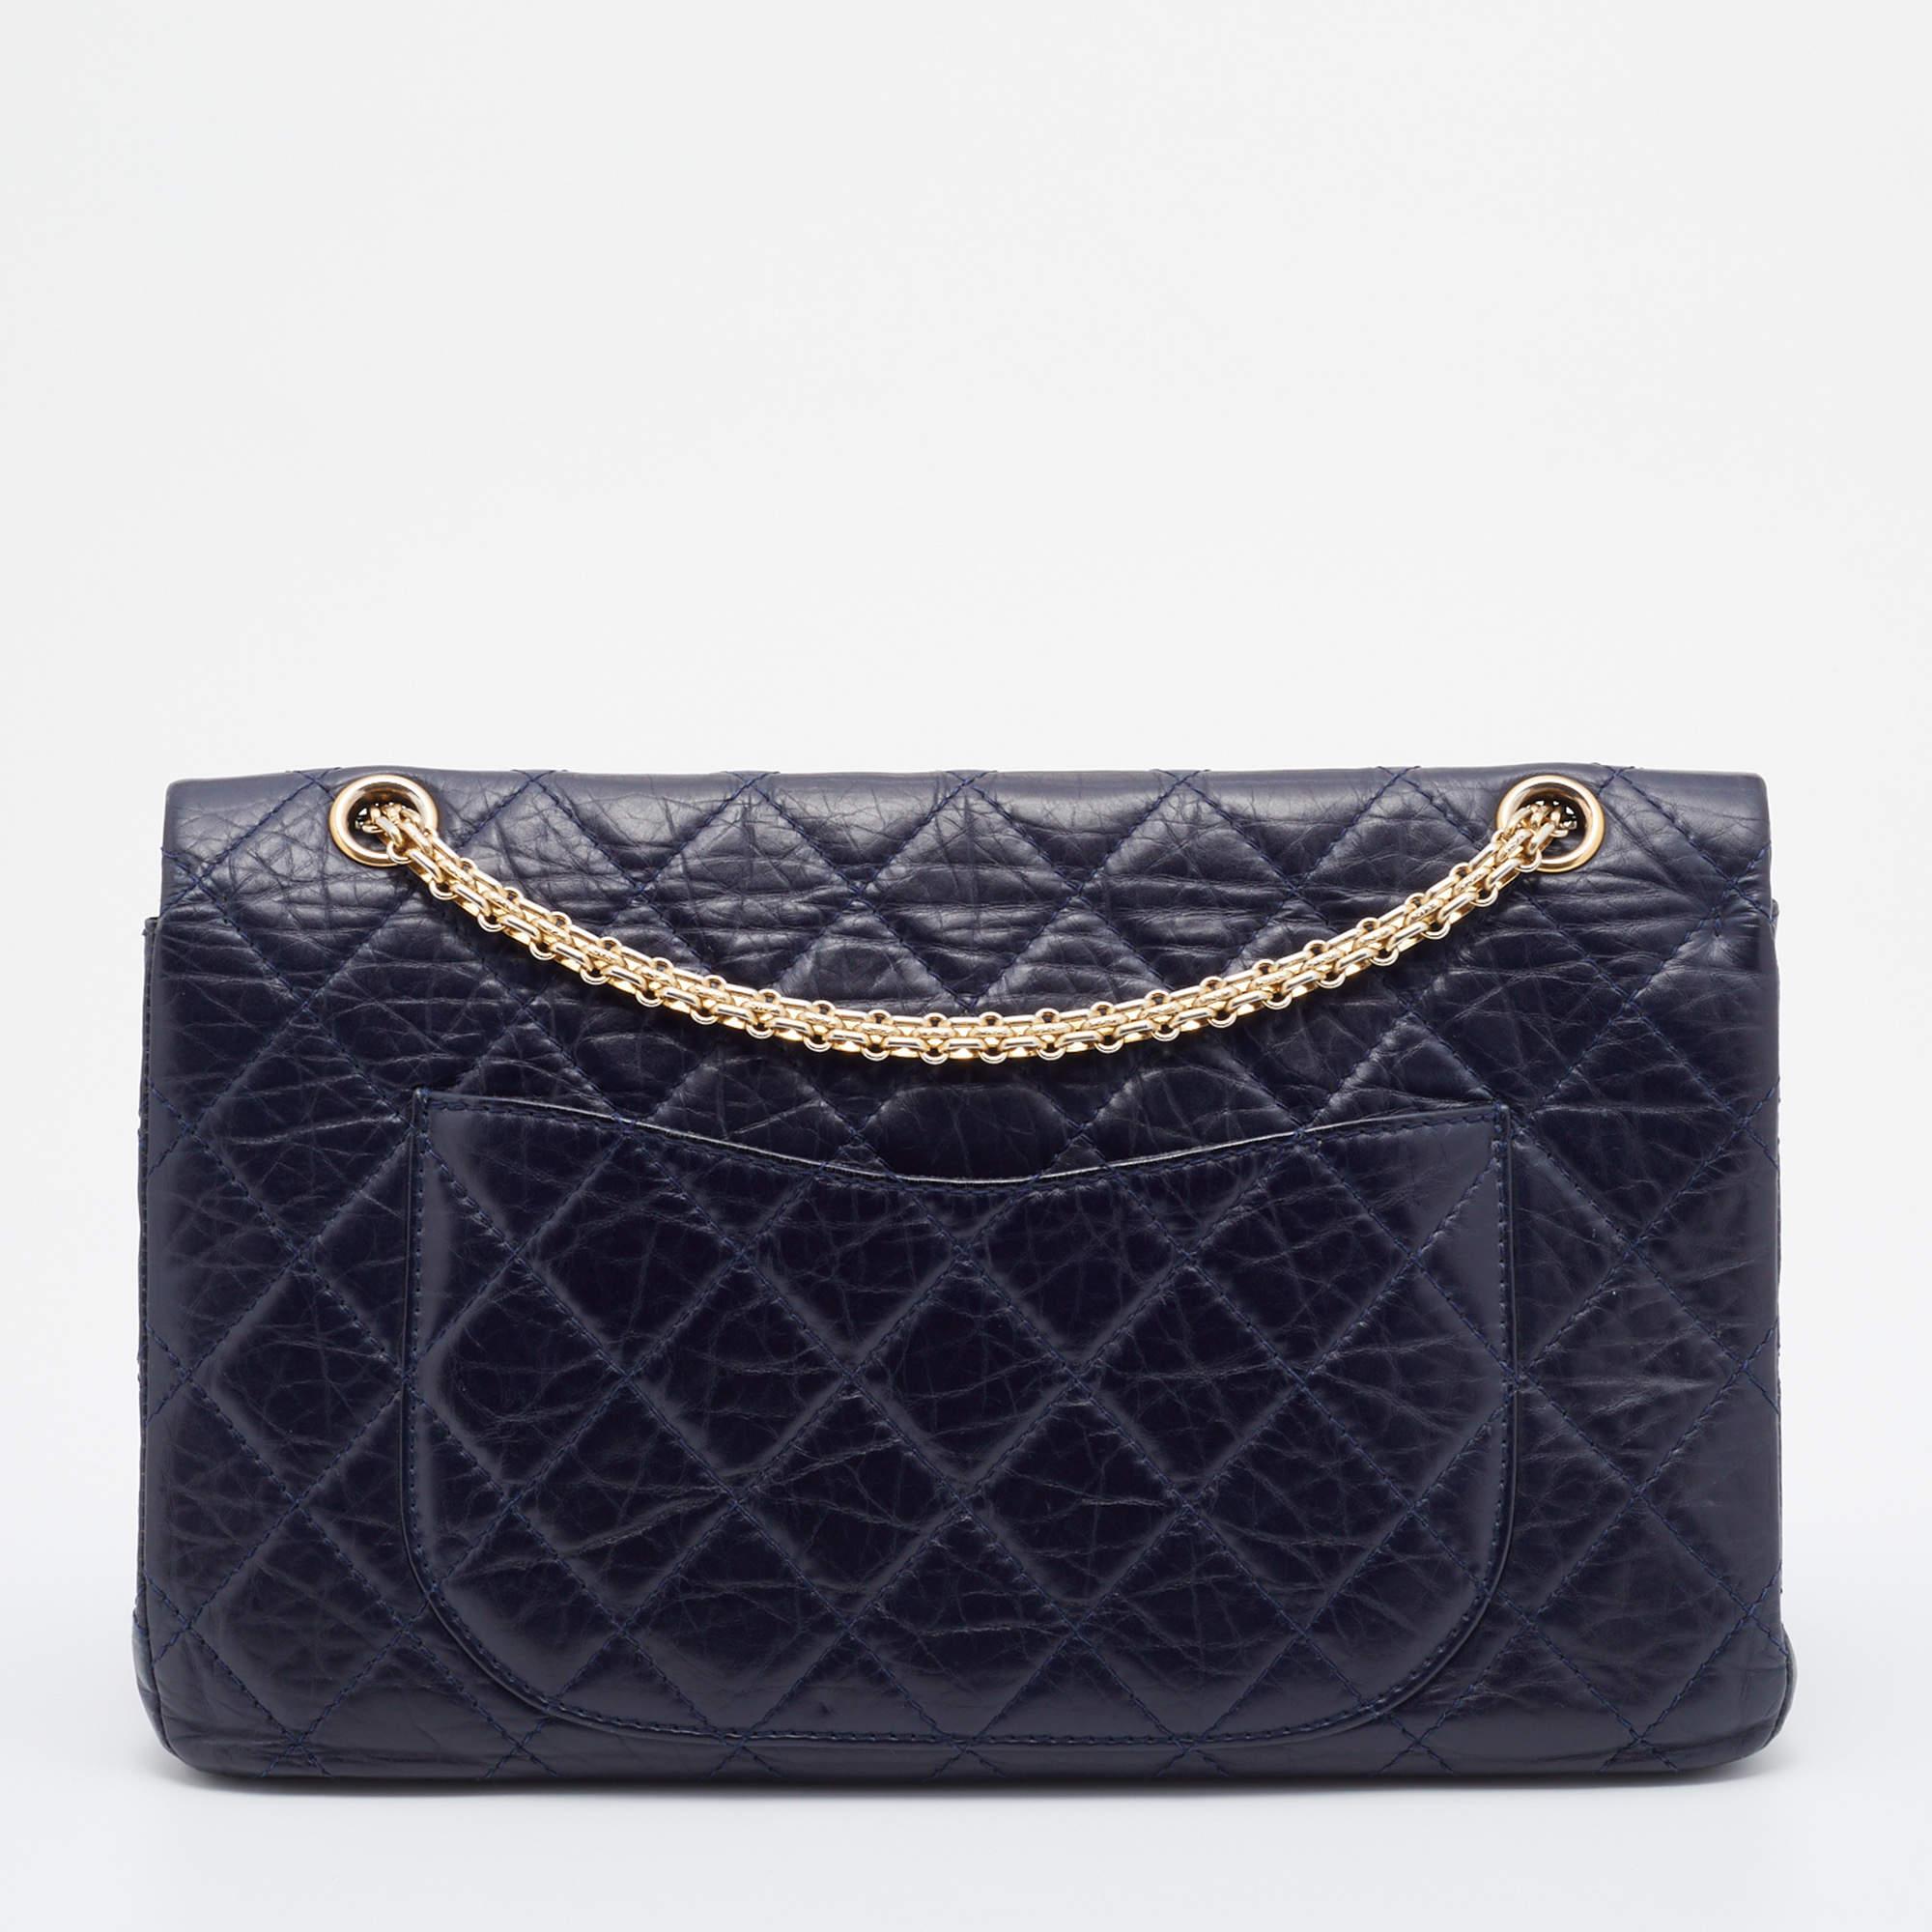 Chanel's Flap Bags are iconic and noteworthy in the history of fashion. Hence, this Reissue 2.55 is a buy that is worth every bit of your splurge. Exquisitely crafted from navy blue crinkled leather, it bears their signature quilt pattern and the